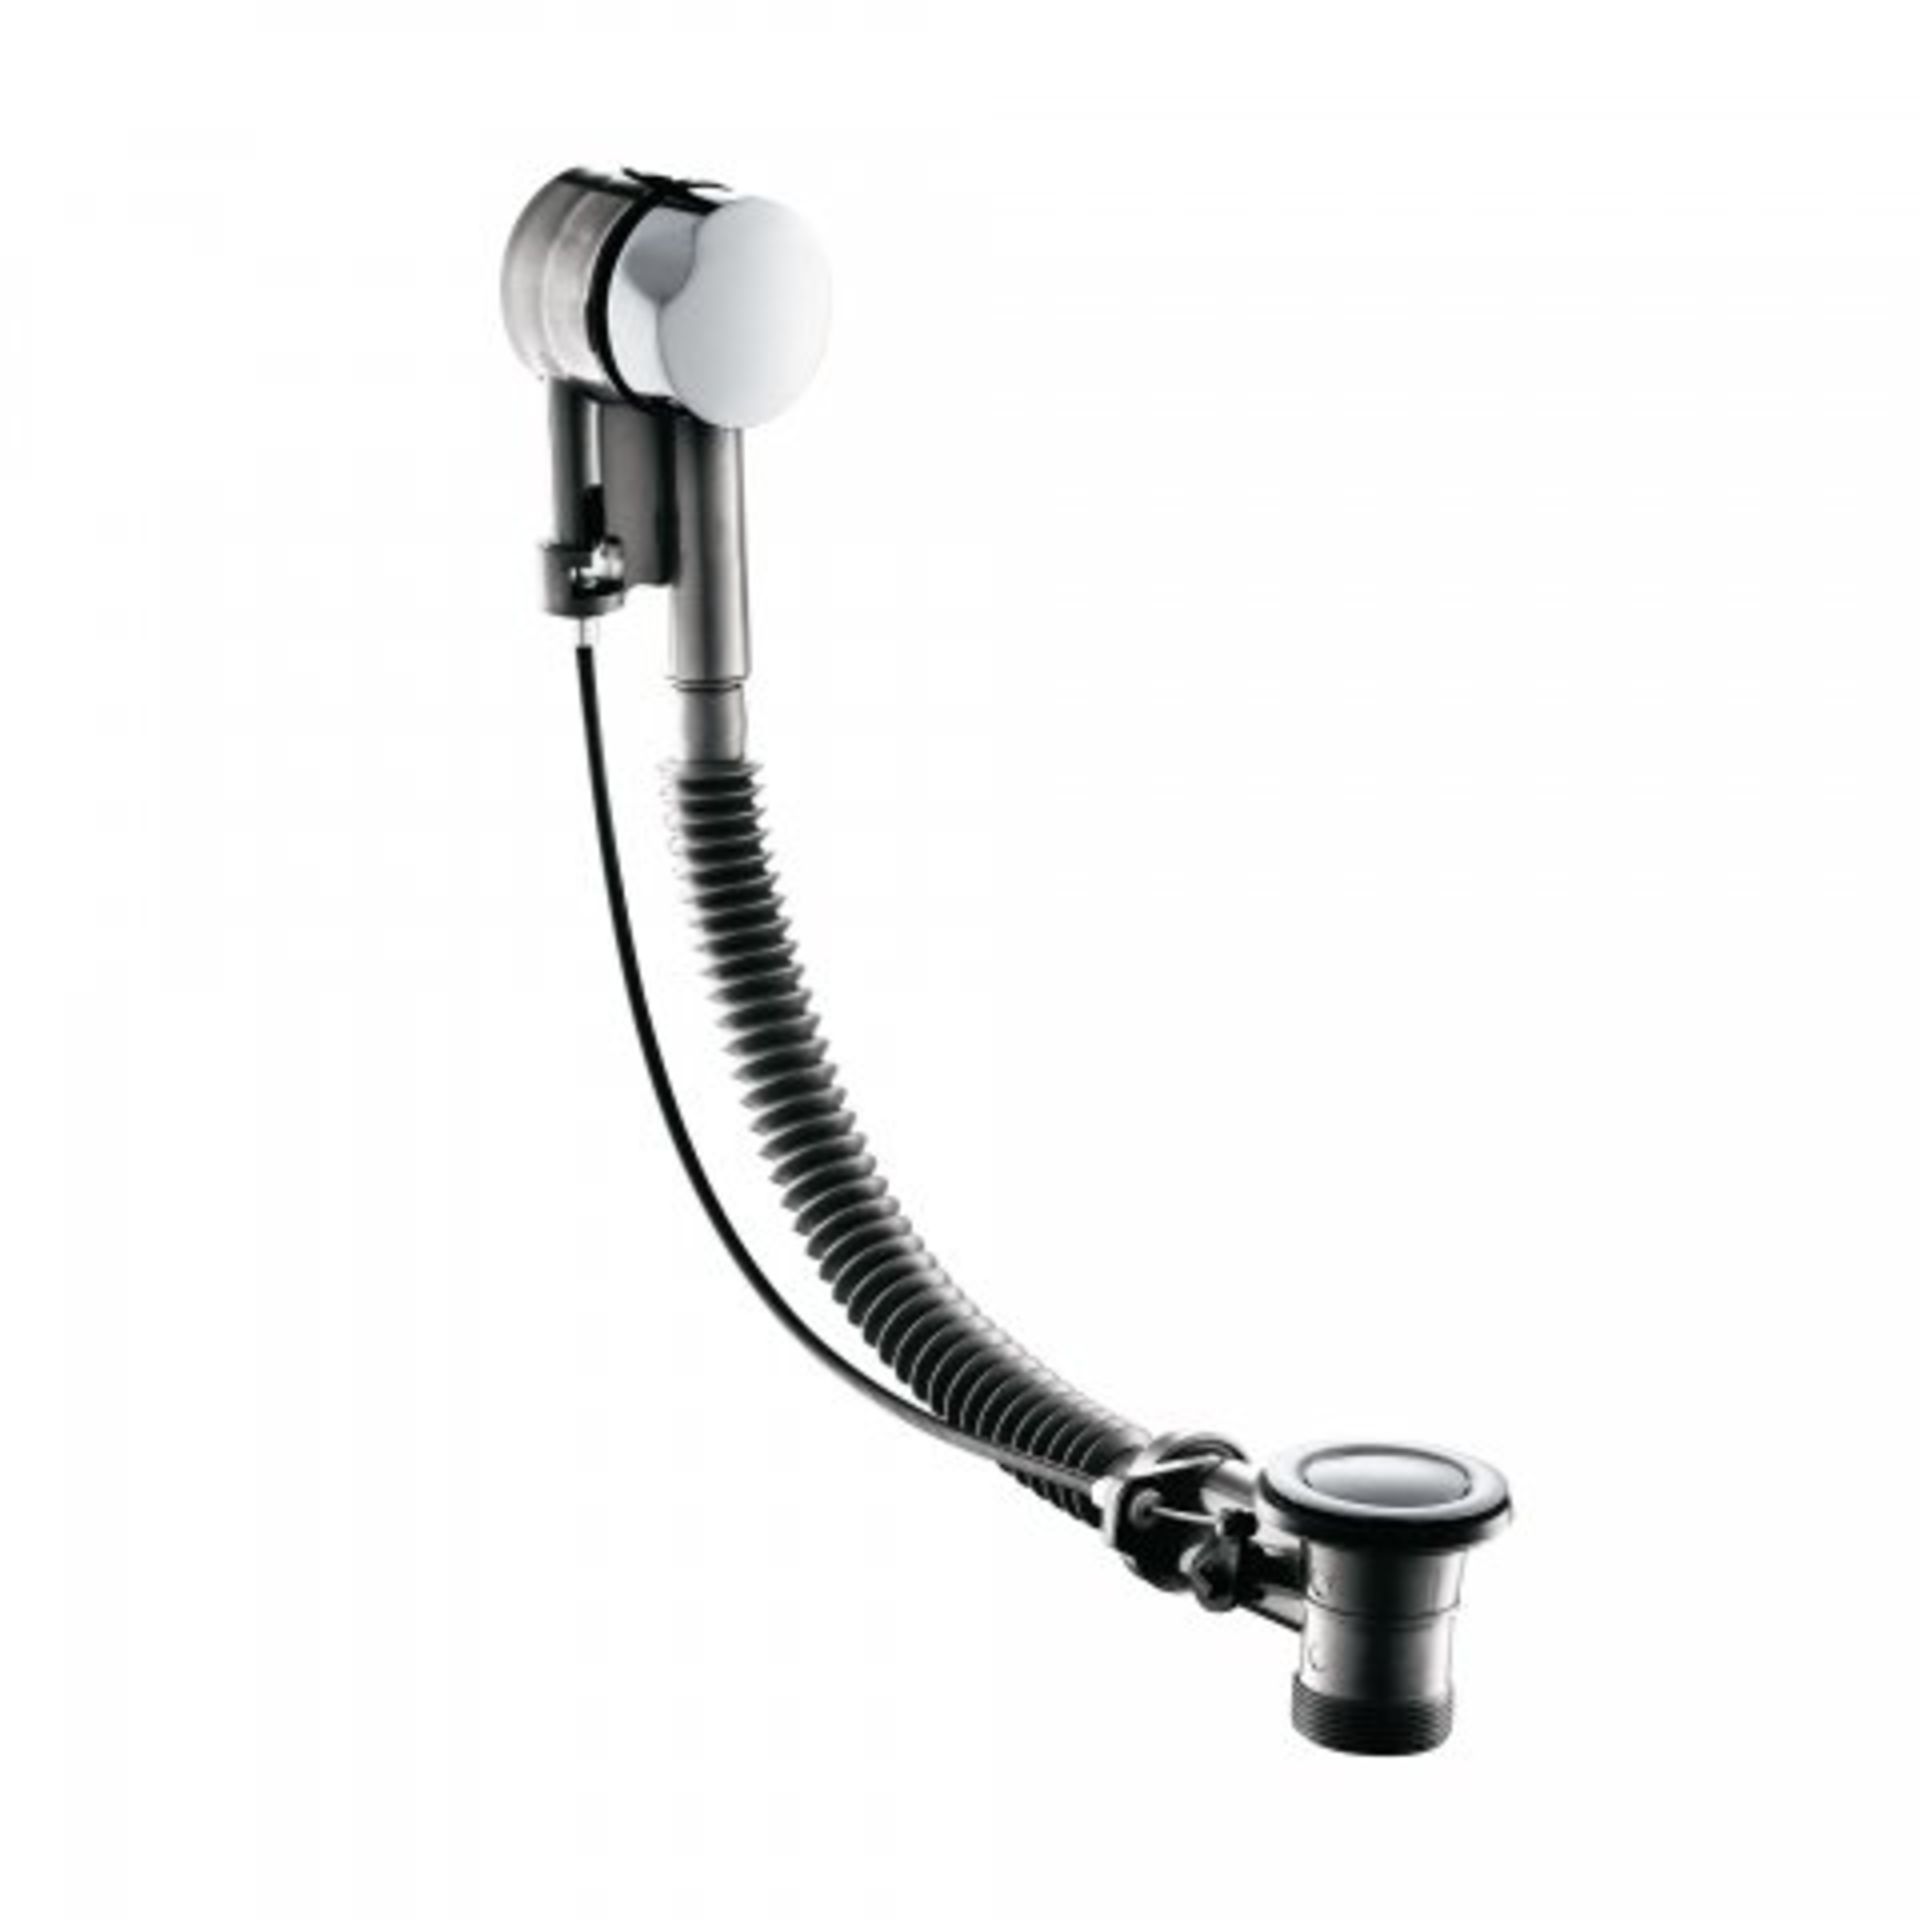 (AA59) Bath Pop Up Waste - Overflow This bath pop-up waste overflow features a durable flex pipe and